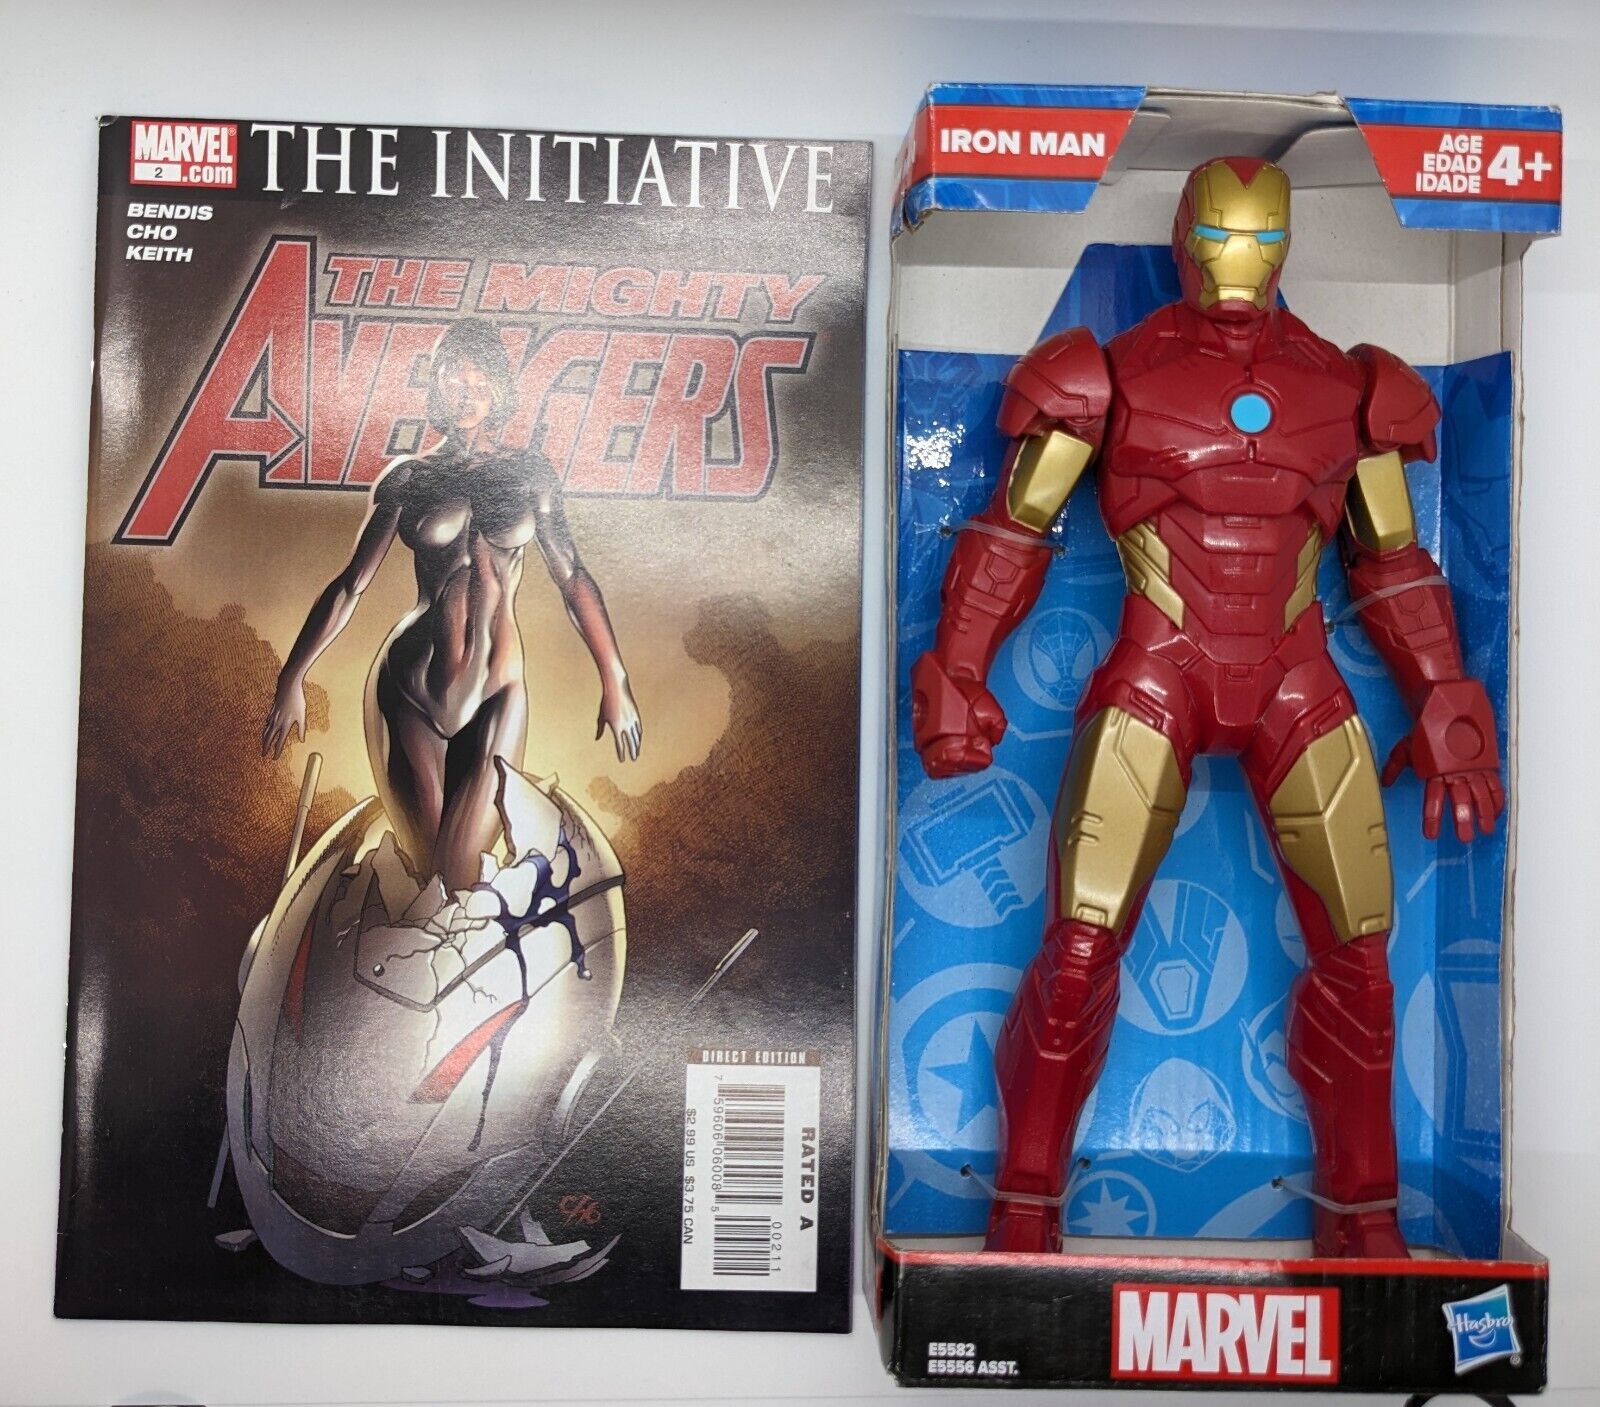 Marvel Comics The Initiative The Mighty Avengers #2 &Iron Man Action figure 9.5'